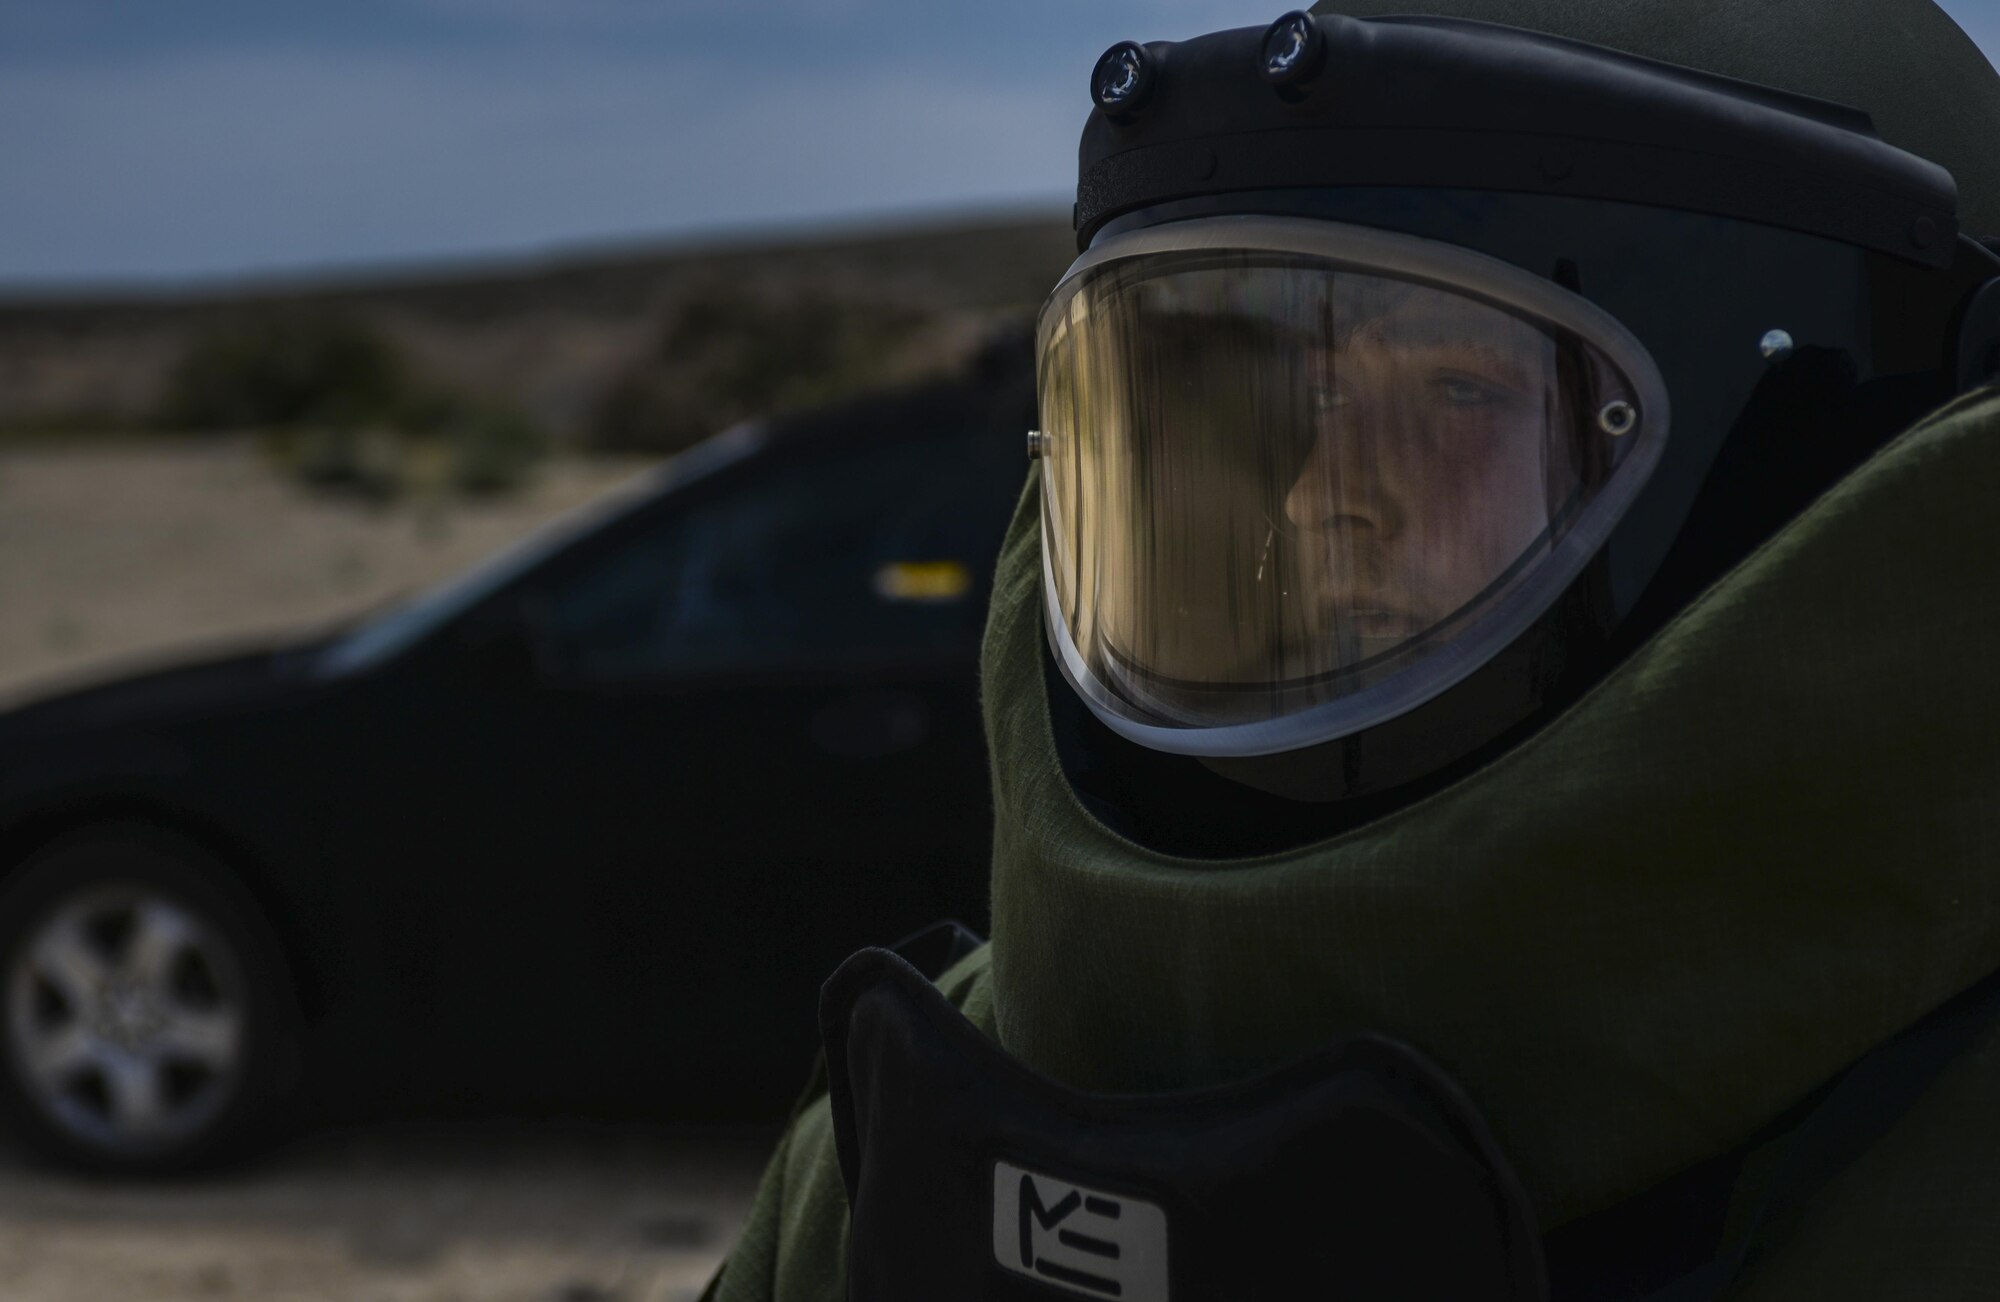 Staff Sgt. John Mitchell, 99th Civil Engineer Squadron explosive ordinance technician, wears an EOD suit during a training exercise at Nellis Air Force Base, Nev., May 5, 2016. Trained to detect, disarm, detonate and dispose of explosive threats all over the world, EODs are the specialists who bravely serve as the Air Force’s bomb squad. (U.S. Air Force photo by Airman 1st Class Kevin Tanenbaum)